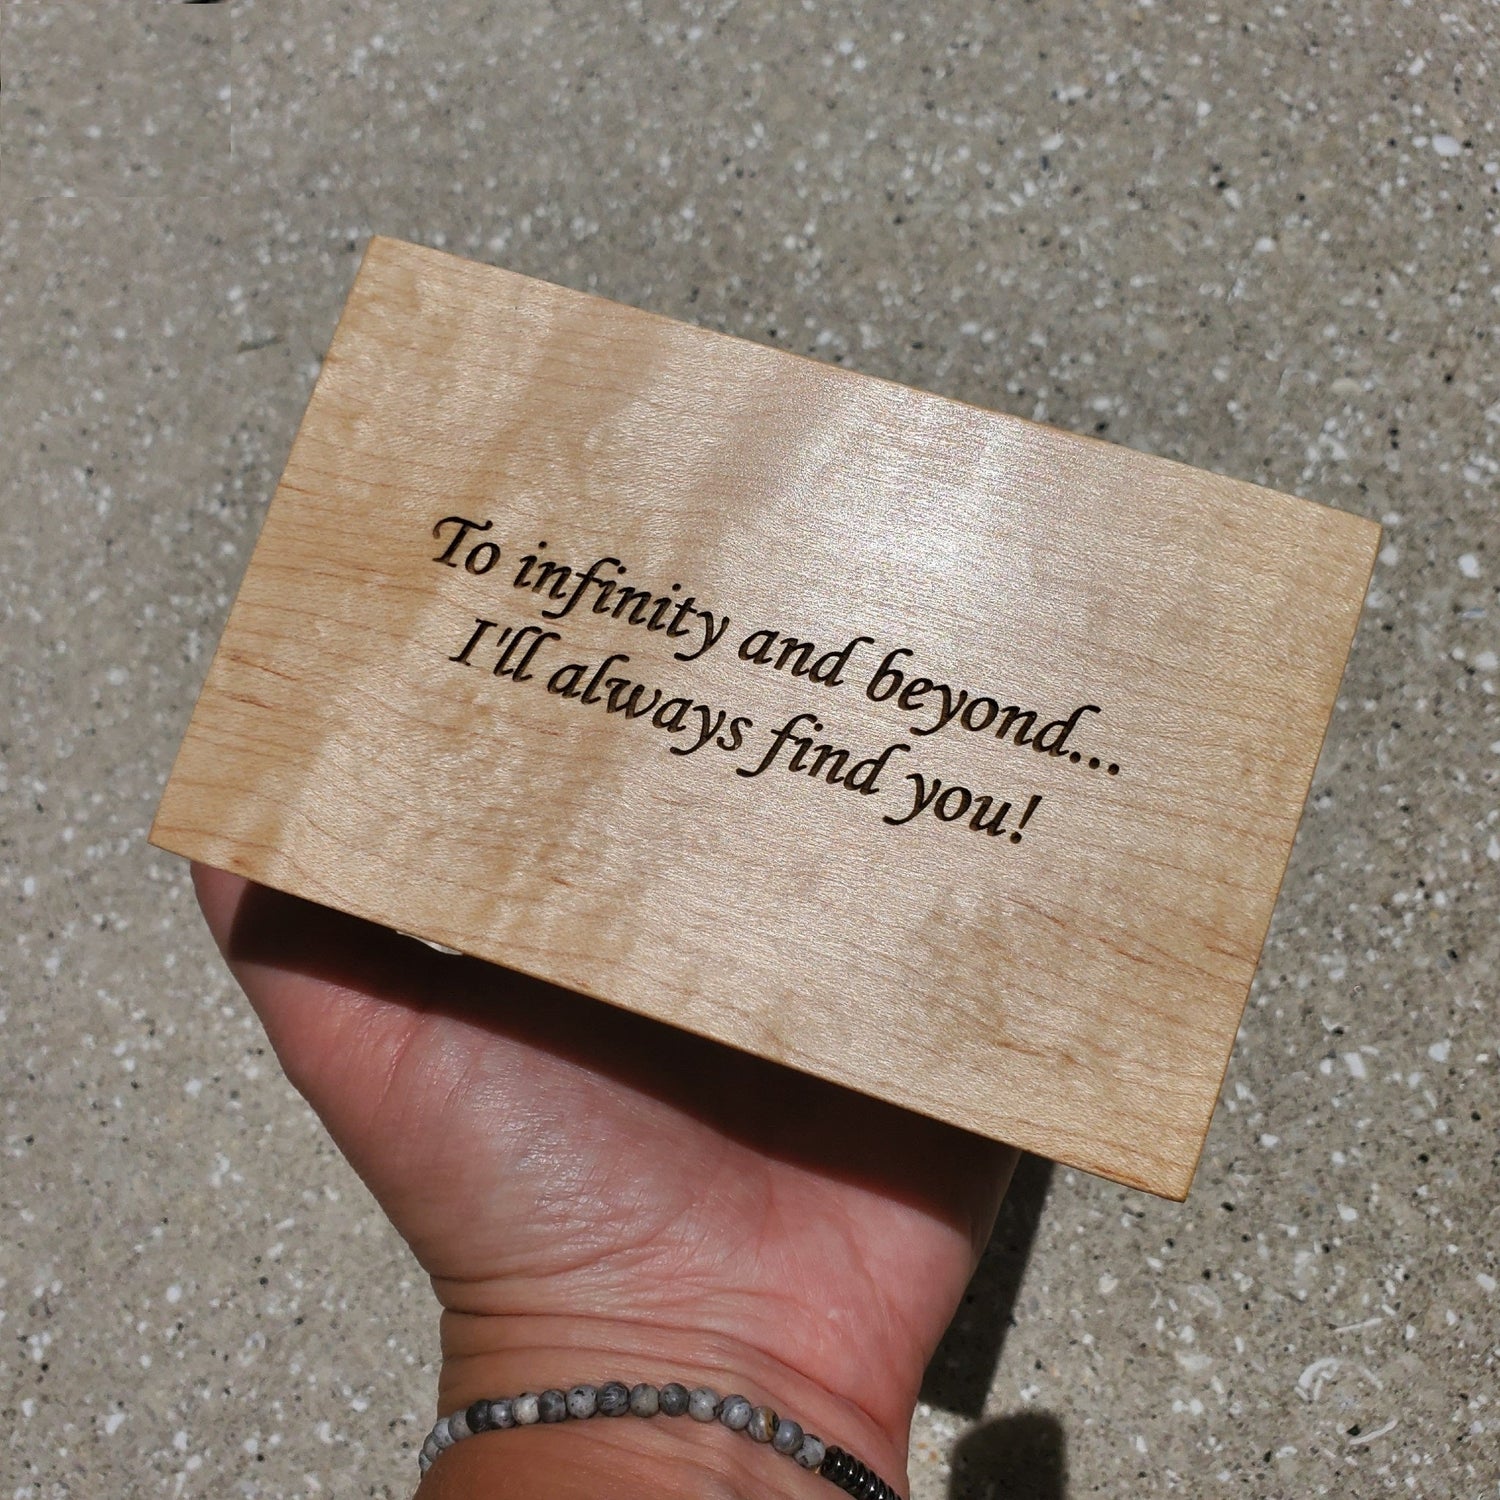 additional engraving for jewelry box